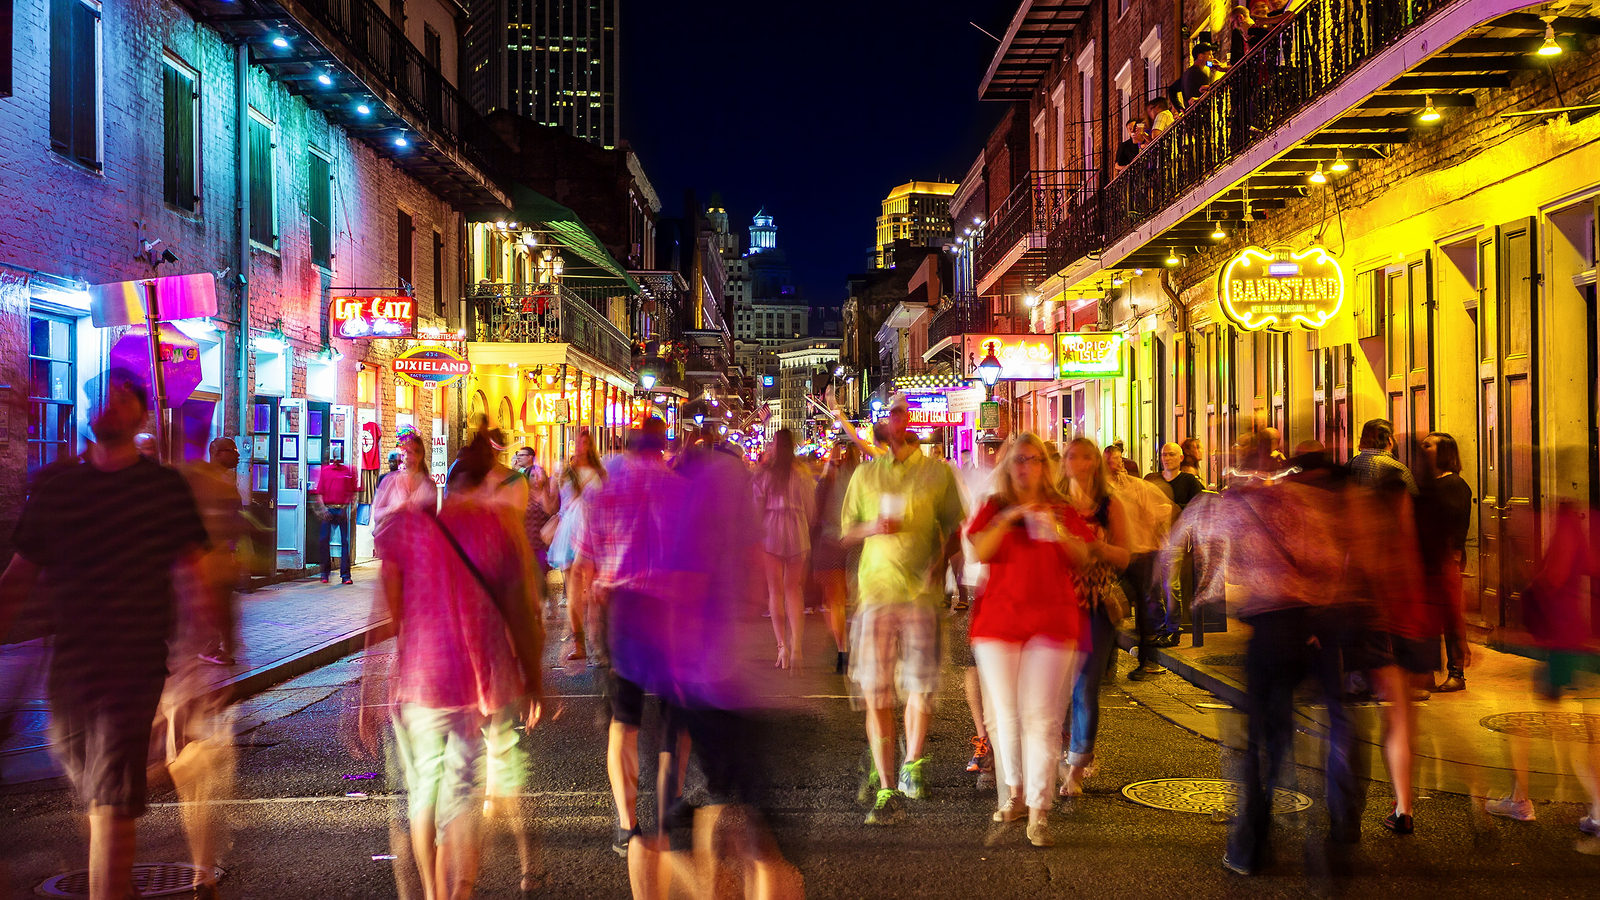 New Orleans Events Calendar 2022 New Orleans March 2022: Events, Concerts, Clubs & Things To Do